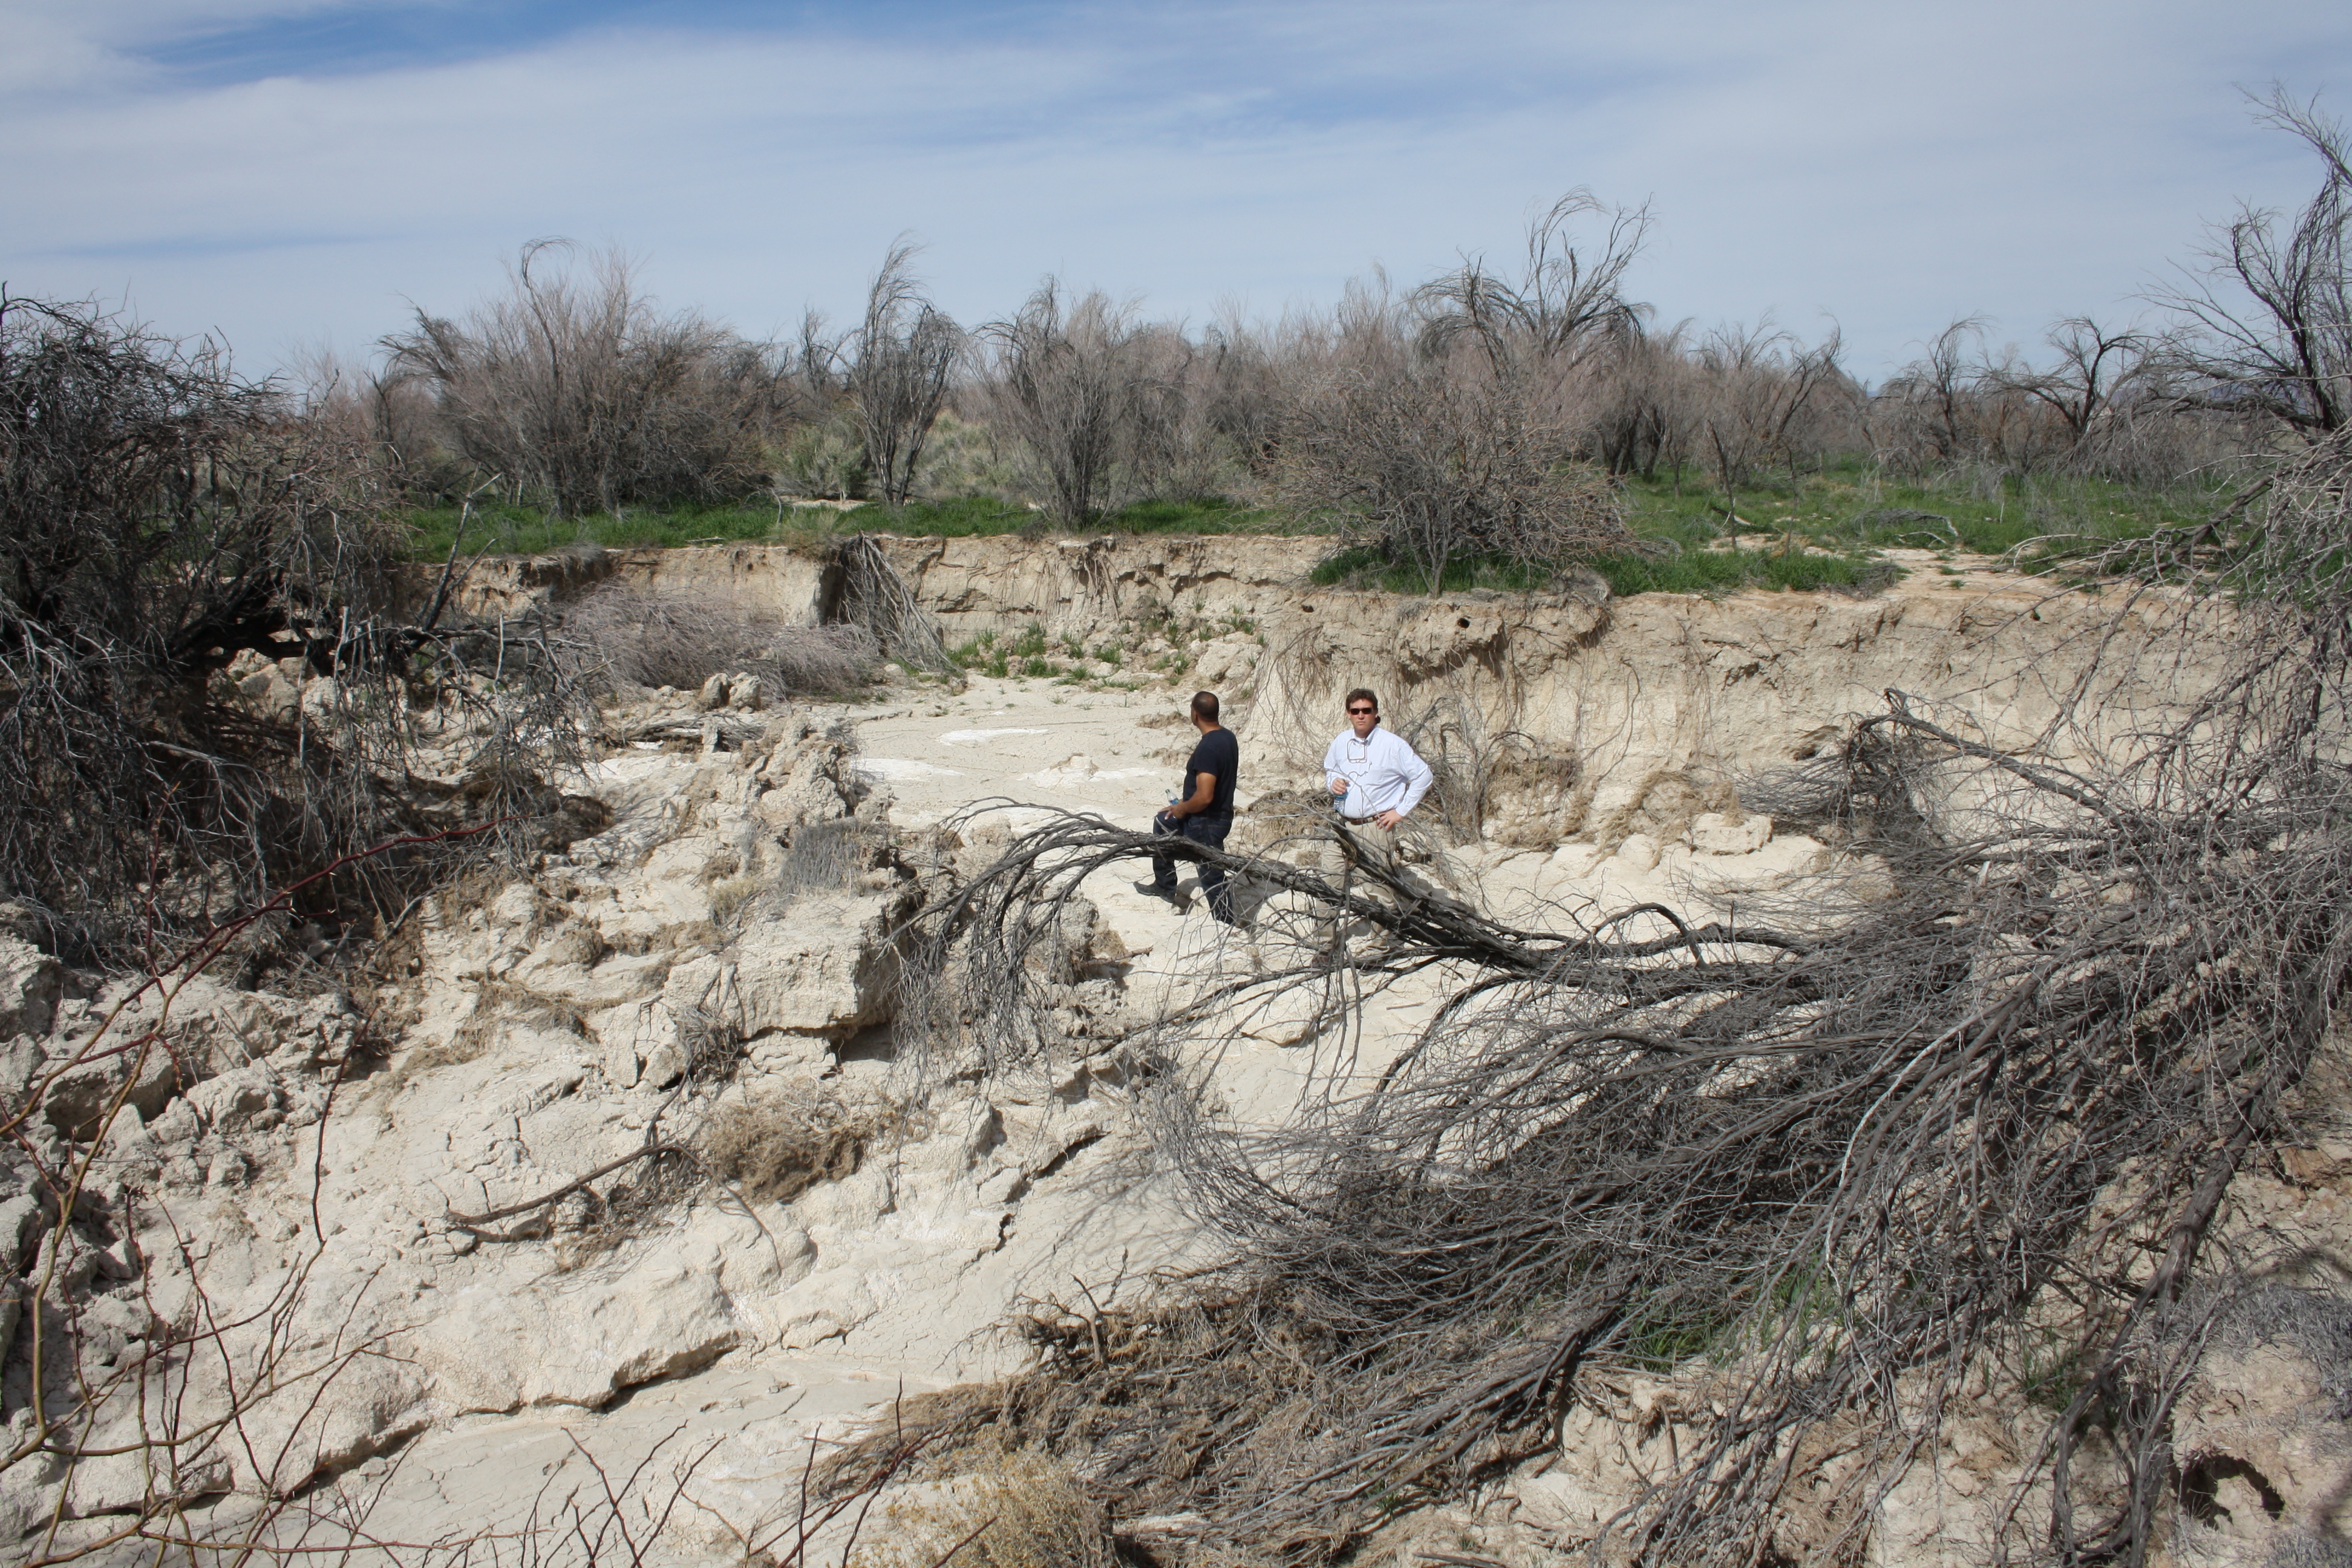 Pastor Victor Fuentes (left) stands with NPRI’s CJCL Director Joe Becker (right) in an area of the property eroded away by repeated flooding.